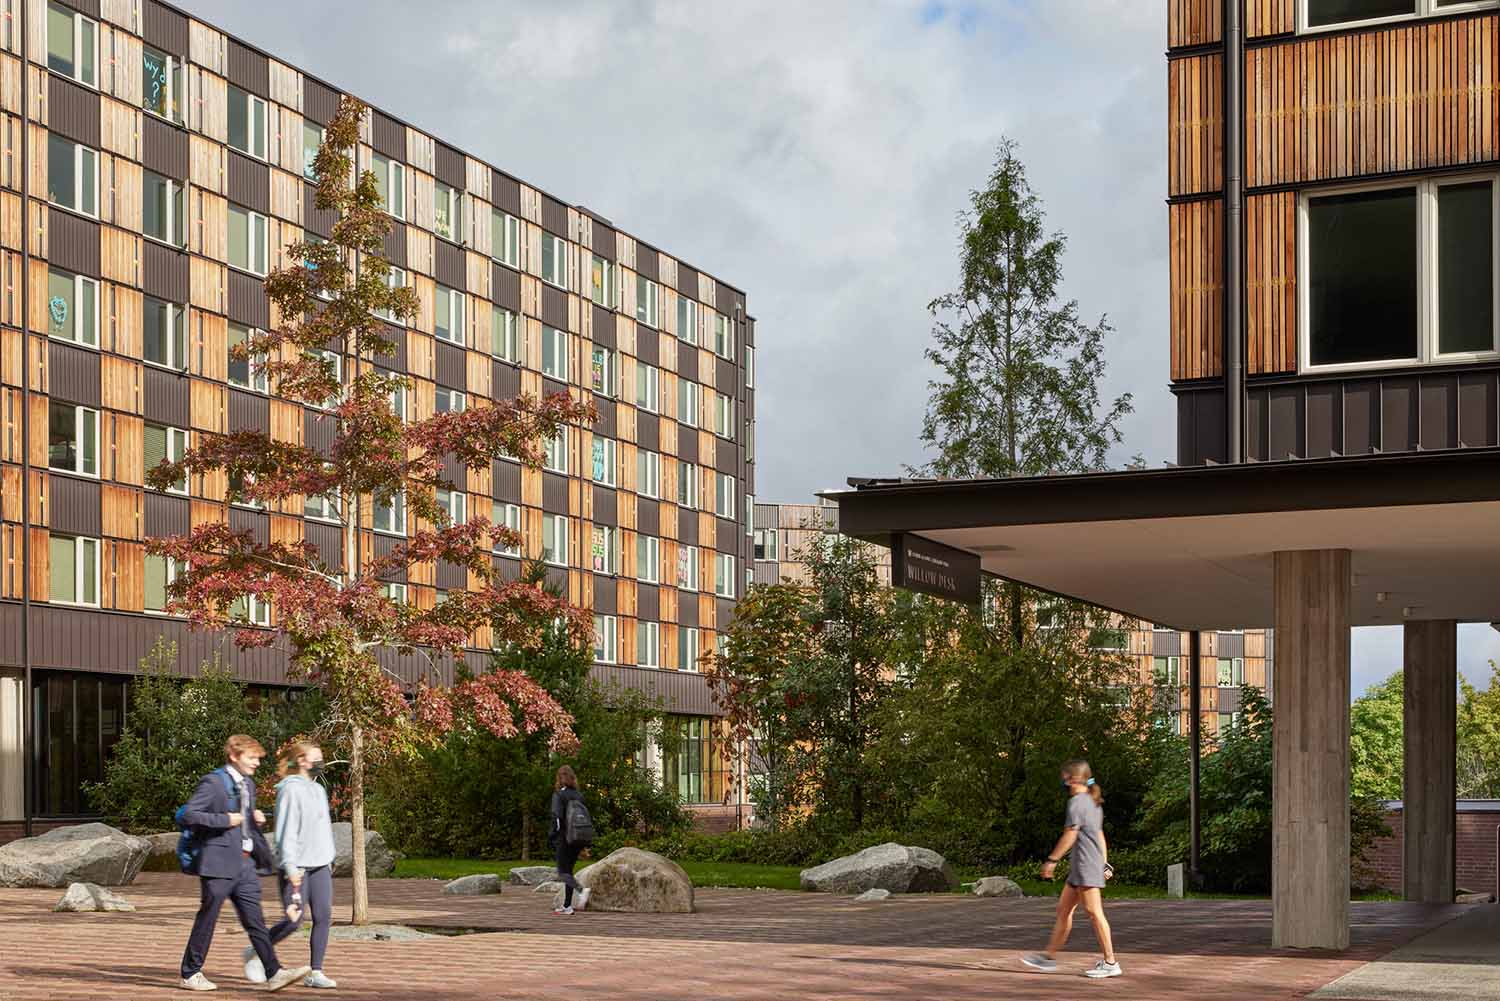 University of Washington North Campus Housing: much more than a dormitory